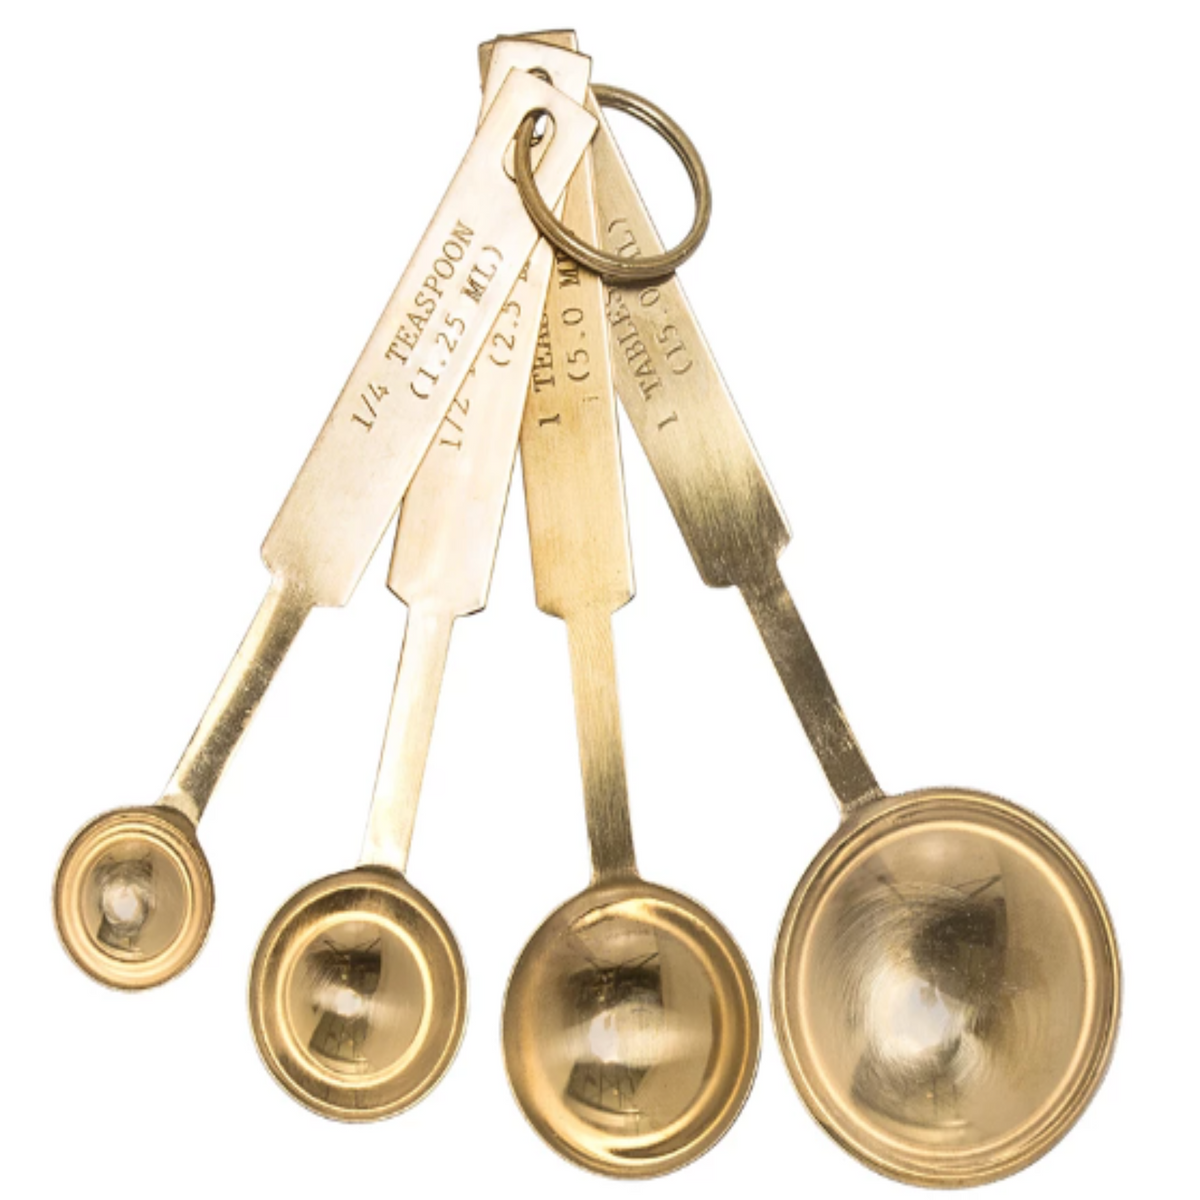 Stainless Steel Measuring Spoons, Set of 4 - Gold Finish